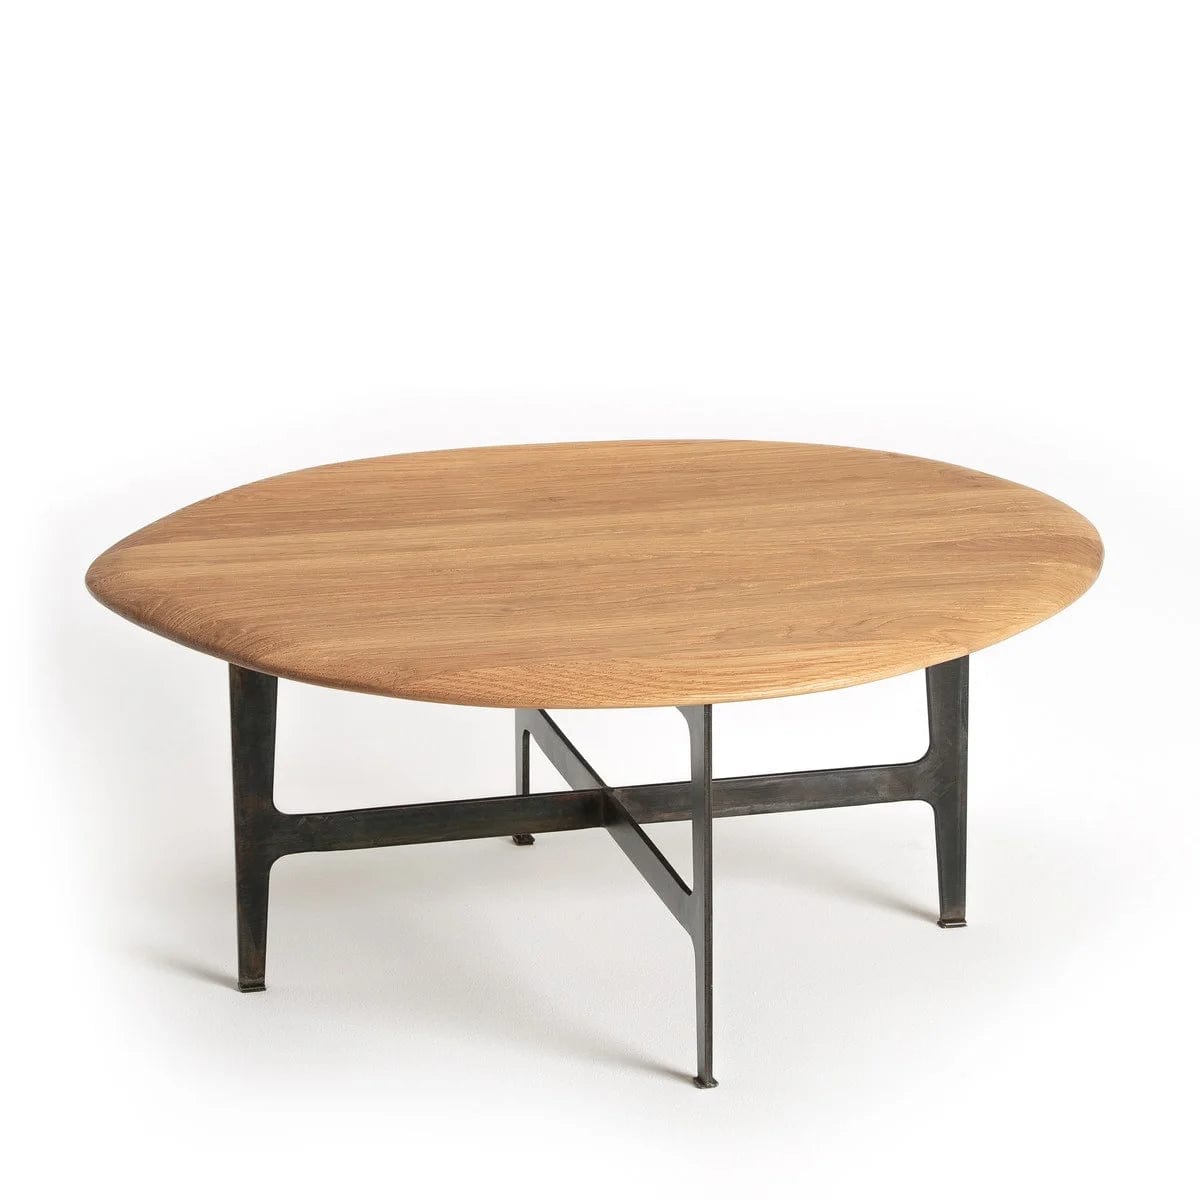 Grand table basse ronde